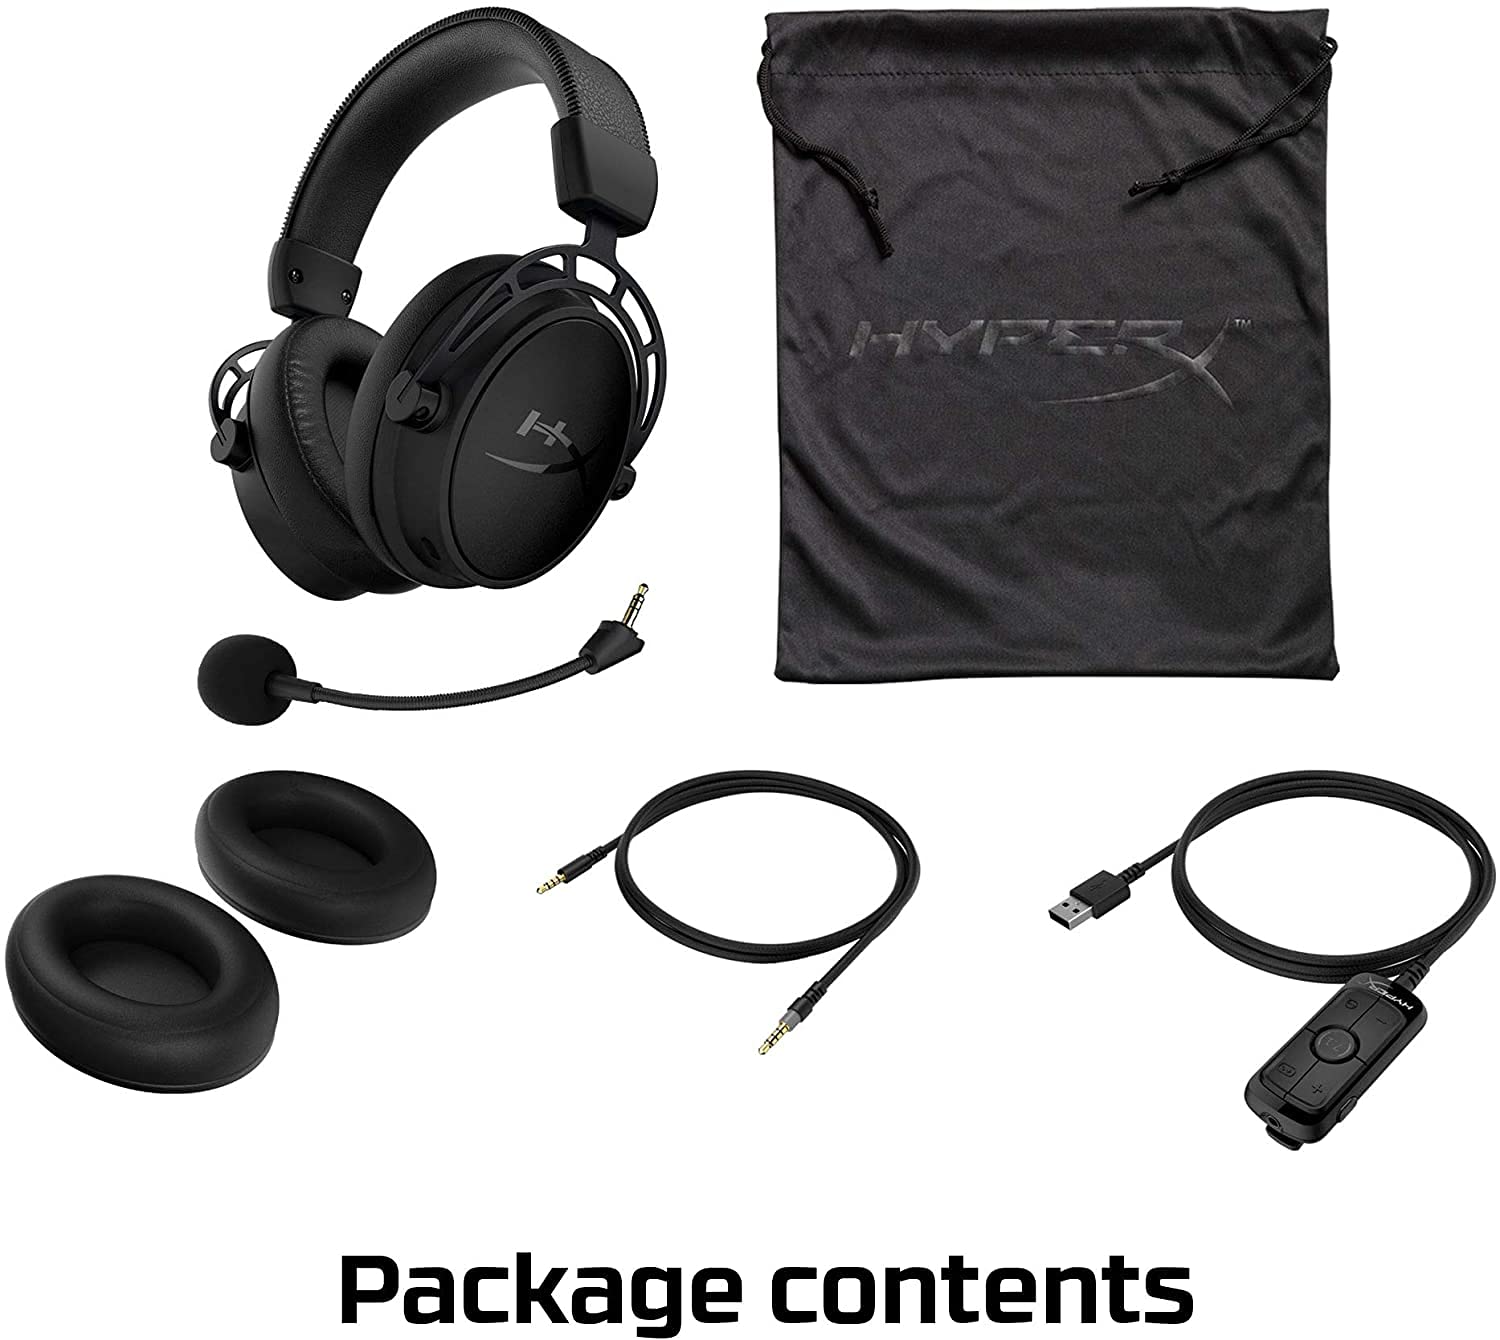 (Open Box) Hyper x Cloud Alpha Black Pro Gaming Wired On Ear Headphones with Mic for Pc, Ps4 & Xbox One, Nintendo Switch (Grade - A+)